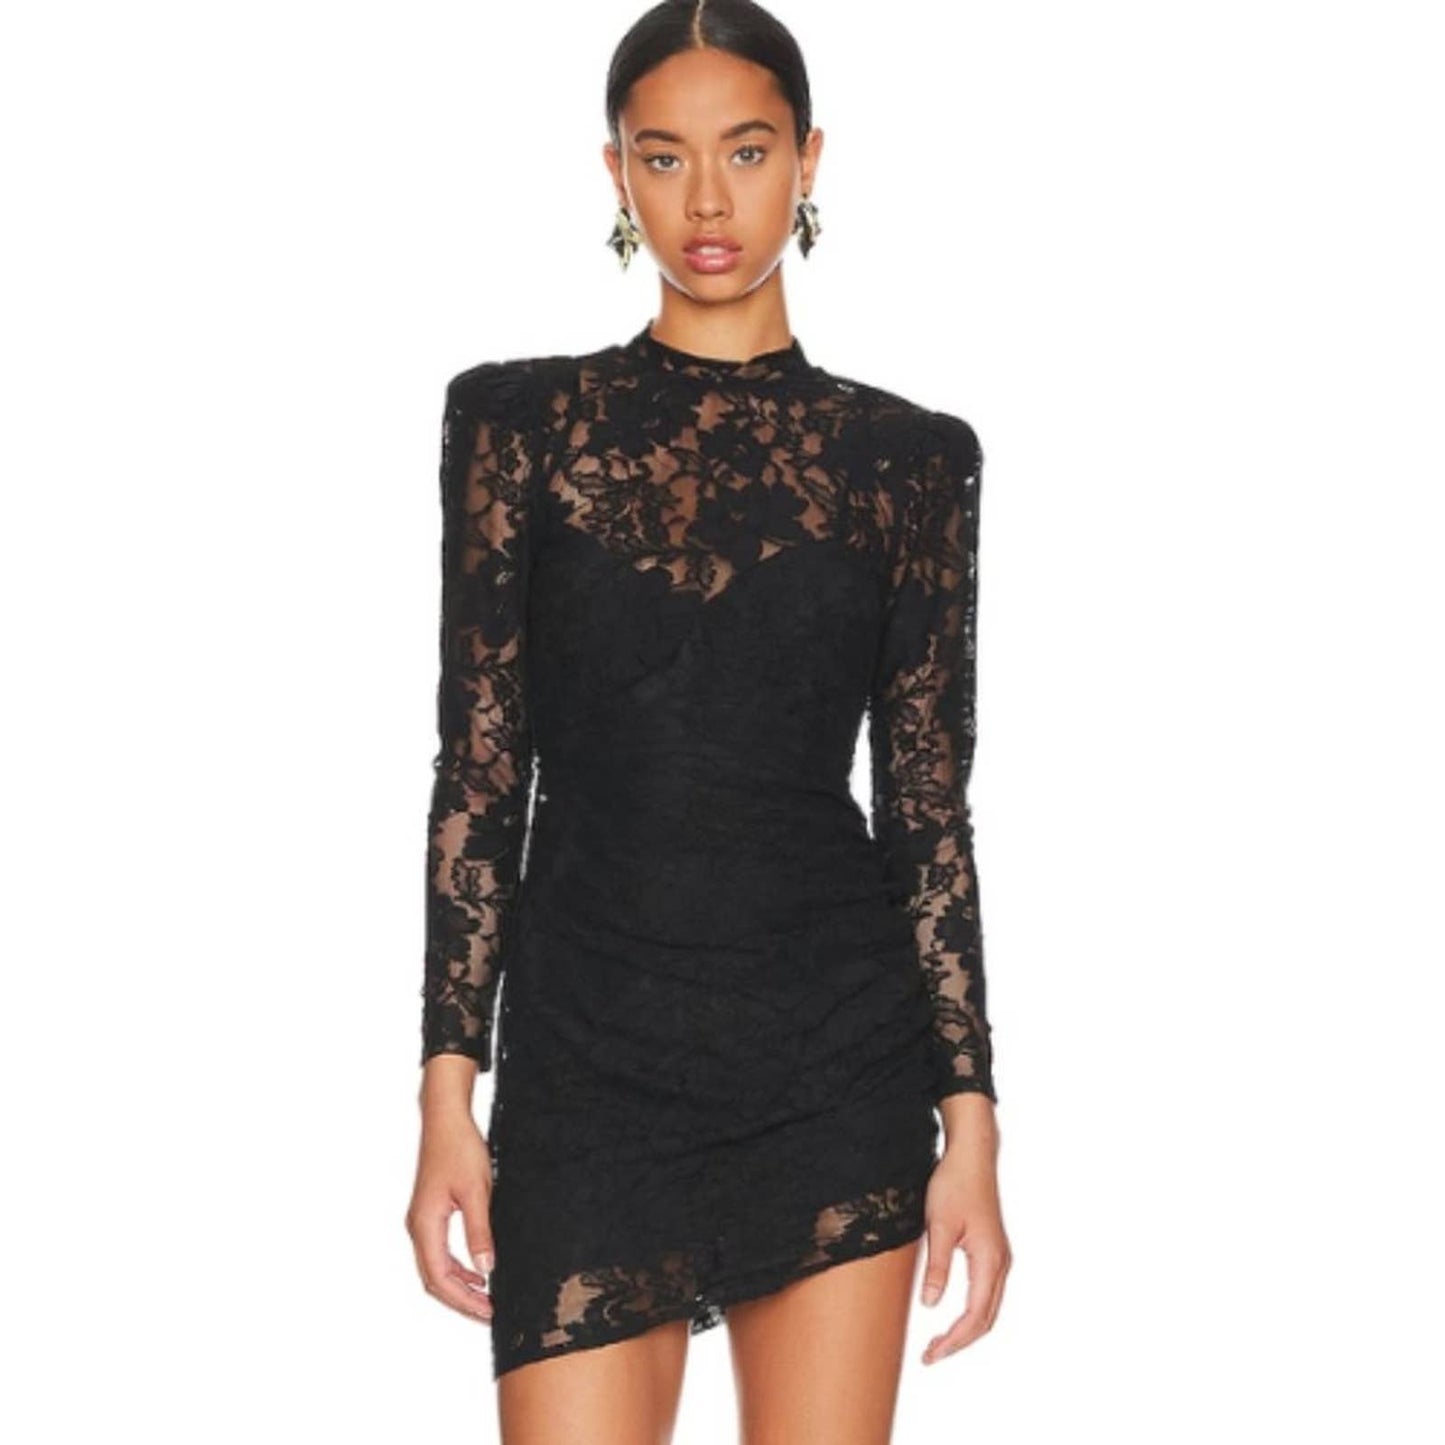 Lovers and Friends Turner Mini Dress in Black Lace NWT Size Small